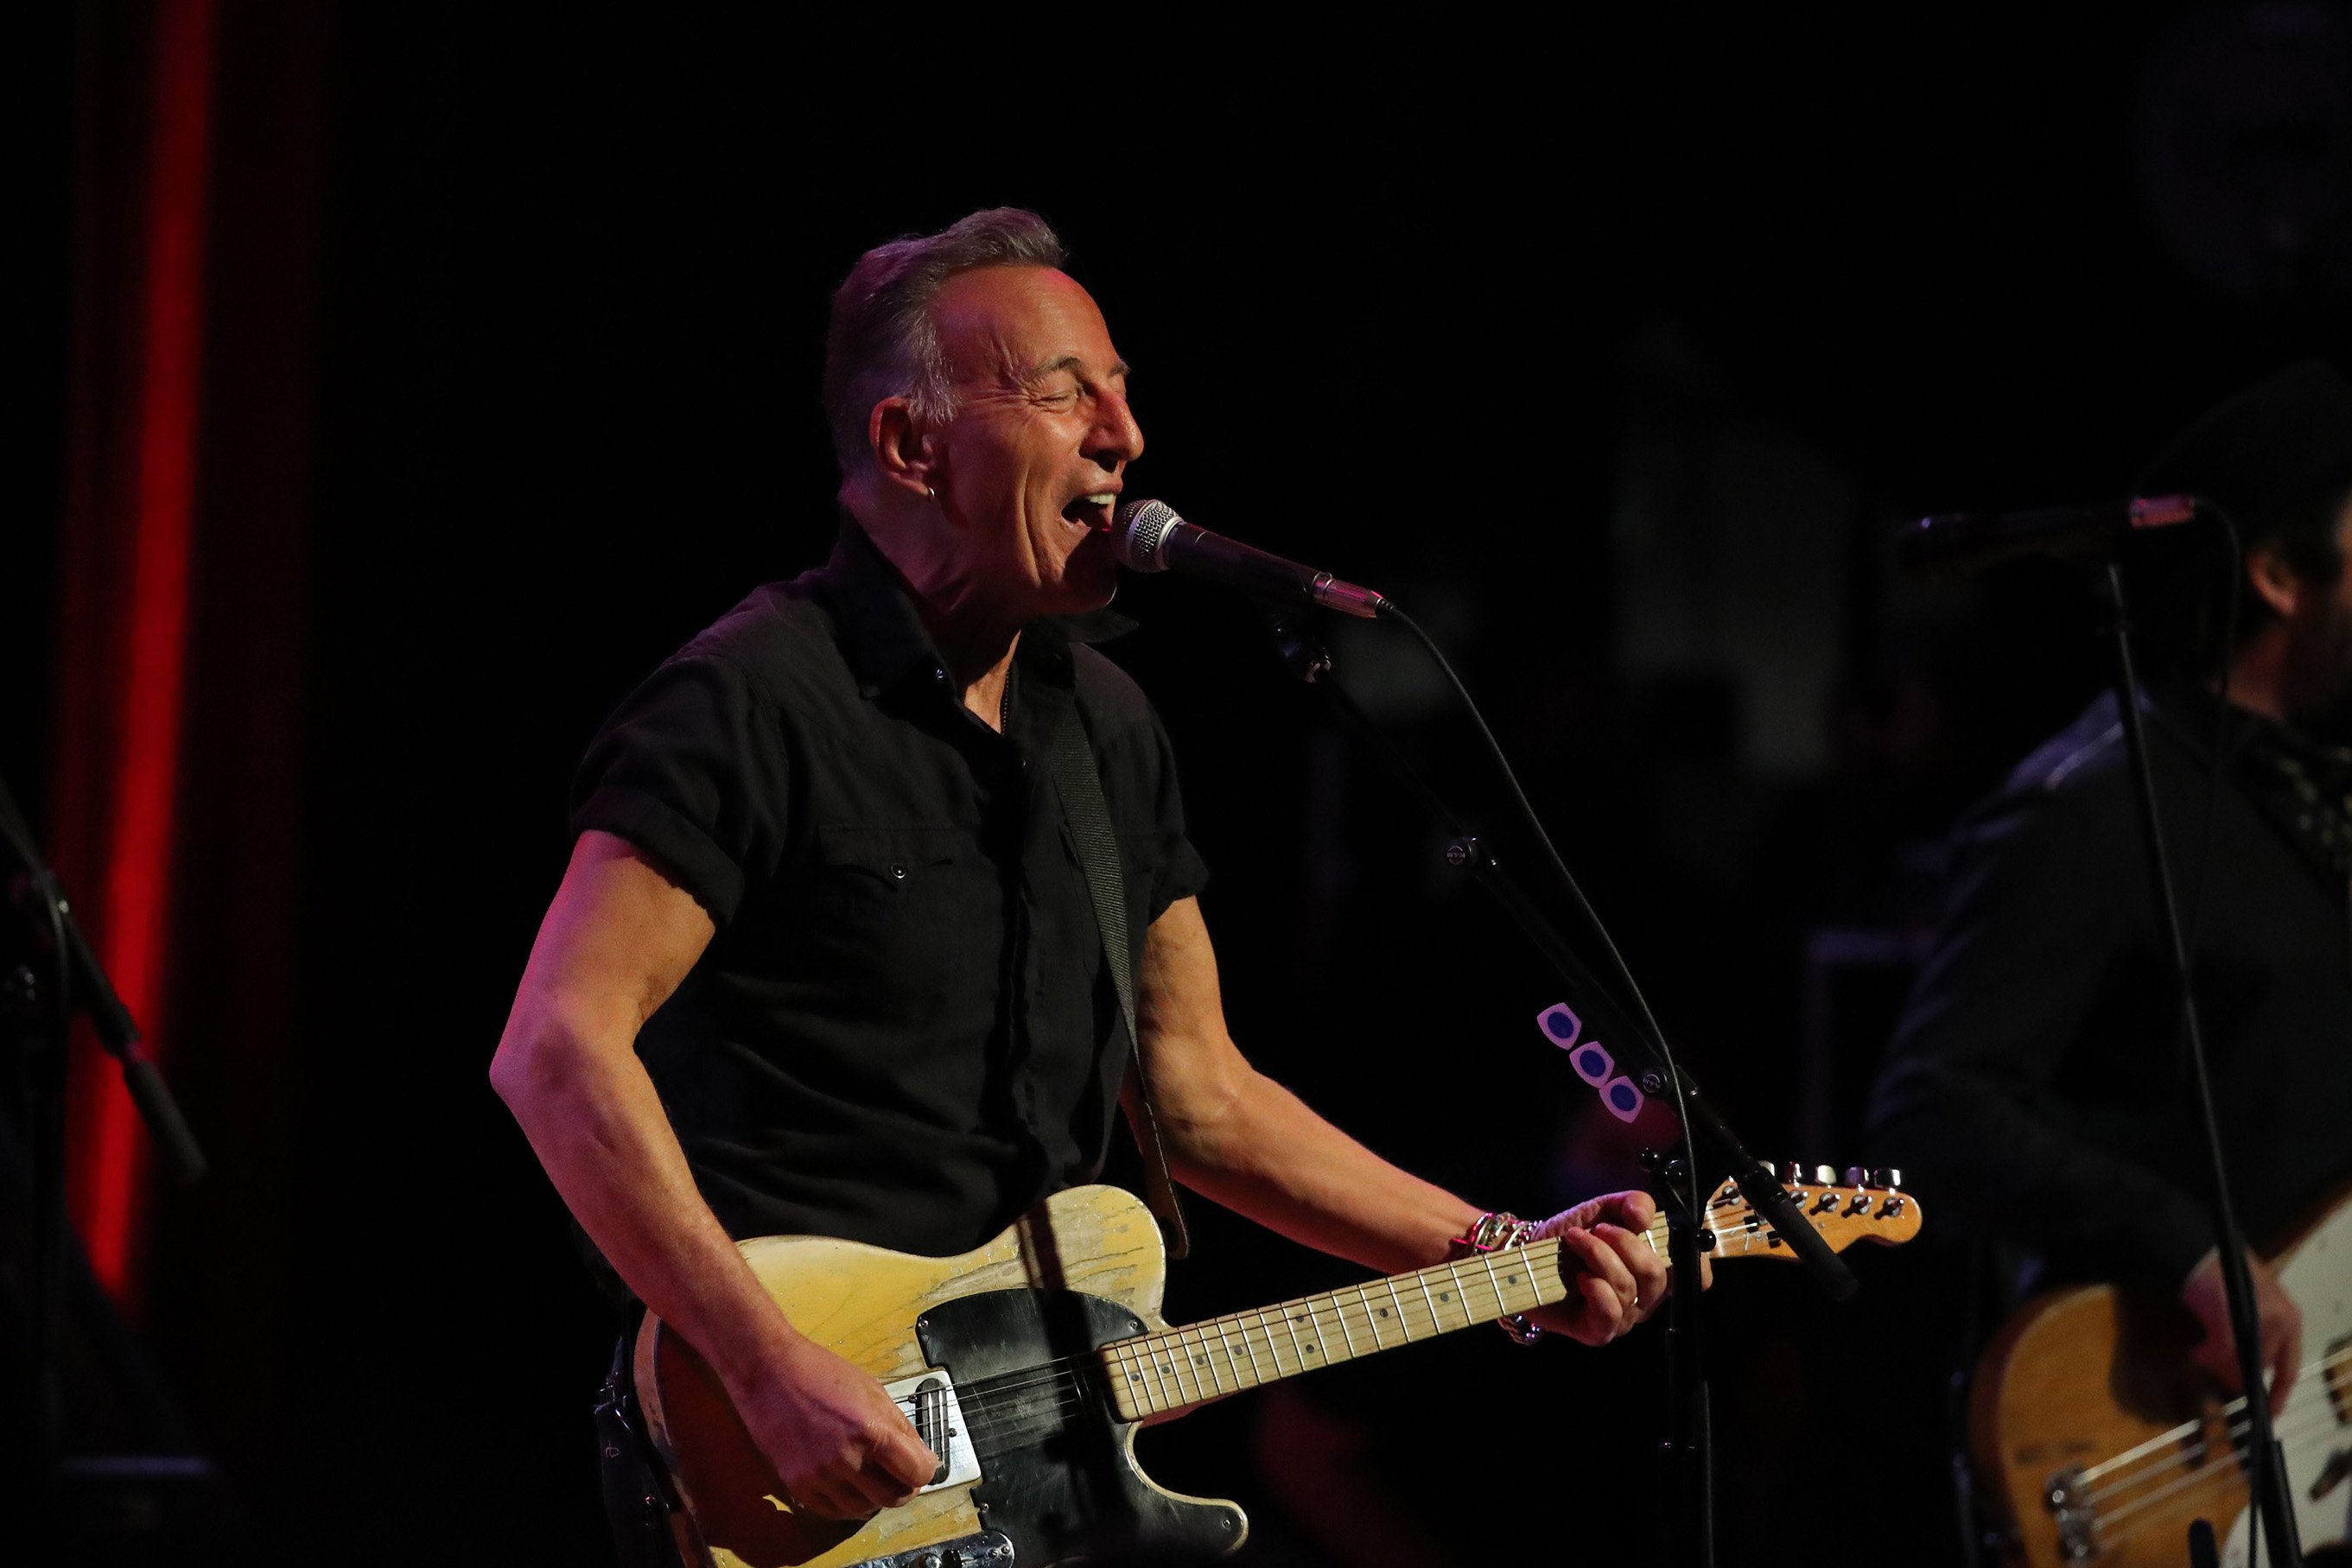 Bruce Springsteen performs at the 7th Annual John Henry's Friends Benefit